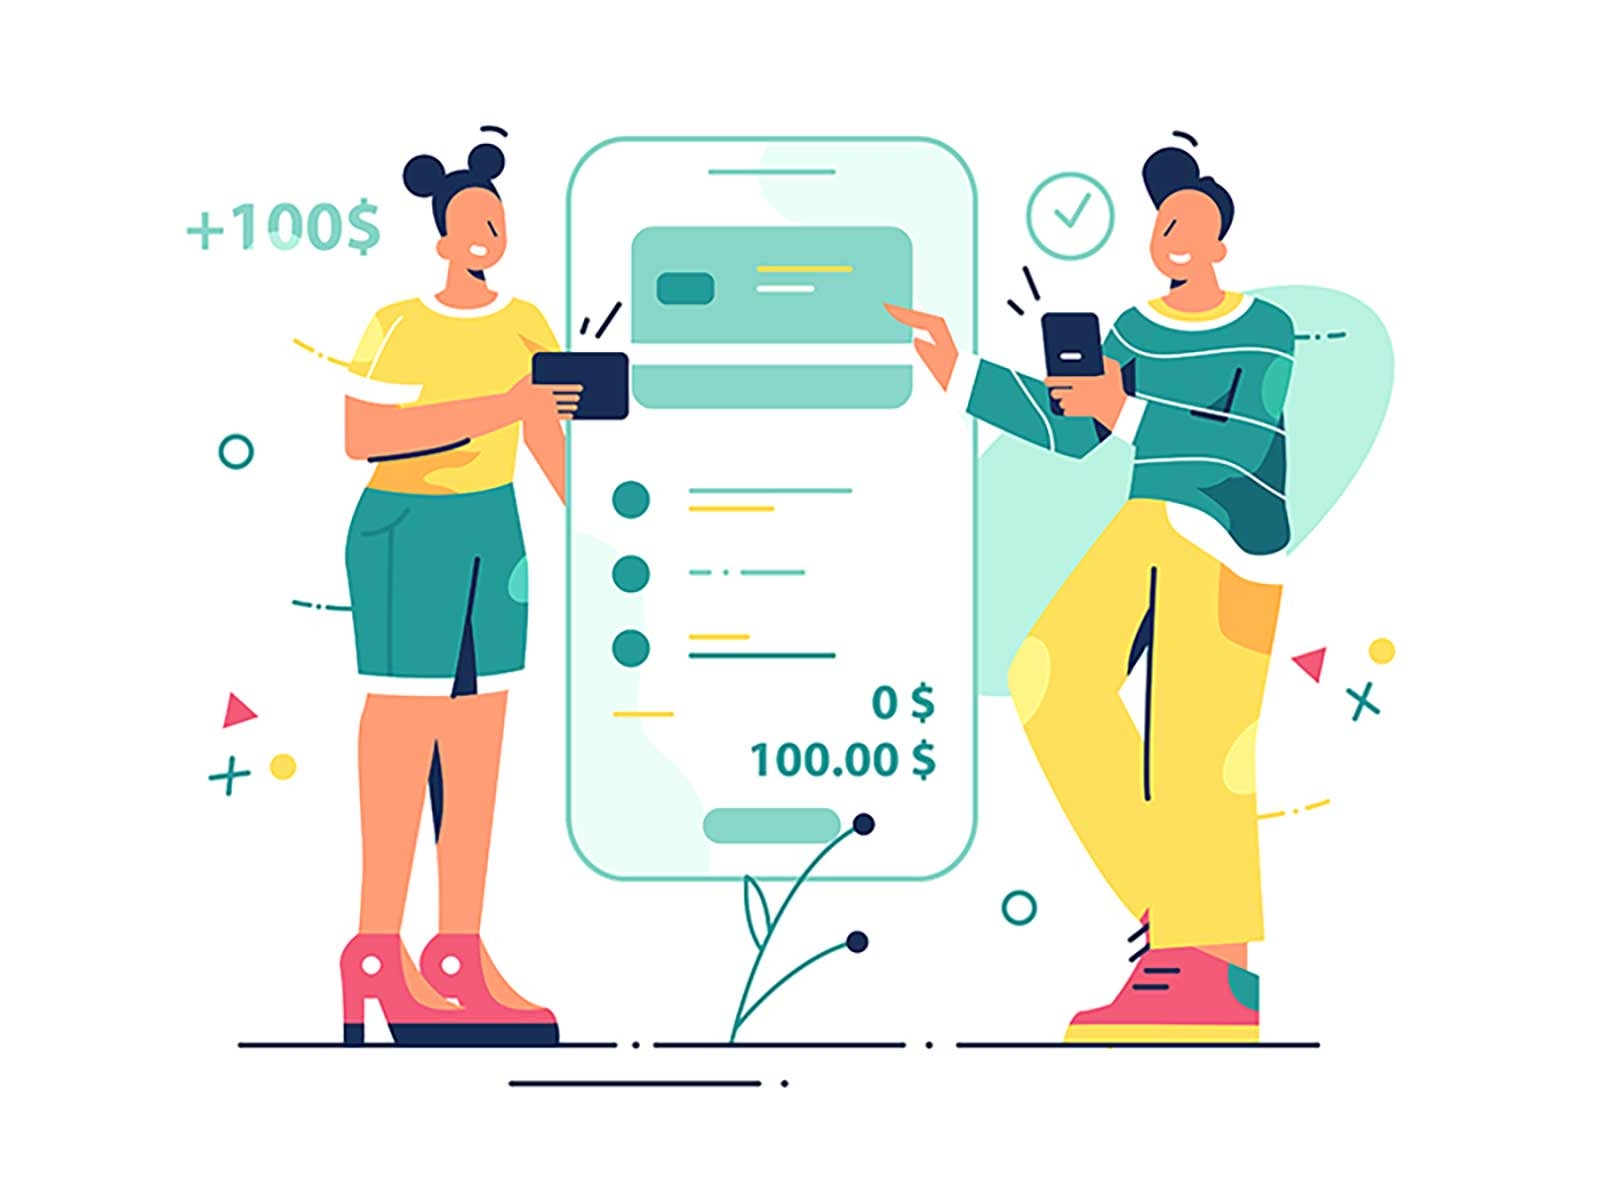 Transferring money to the card card concept device display economy finance flat gadget illustration income money number online people salary screen smartphone style transferring vector